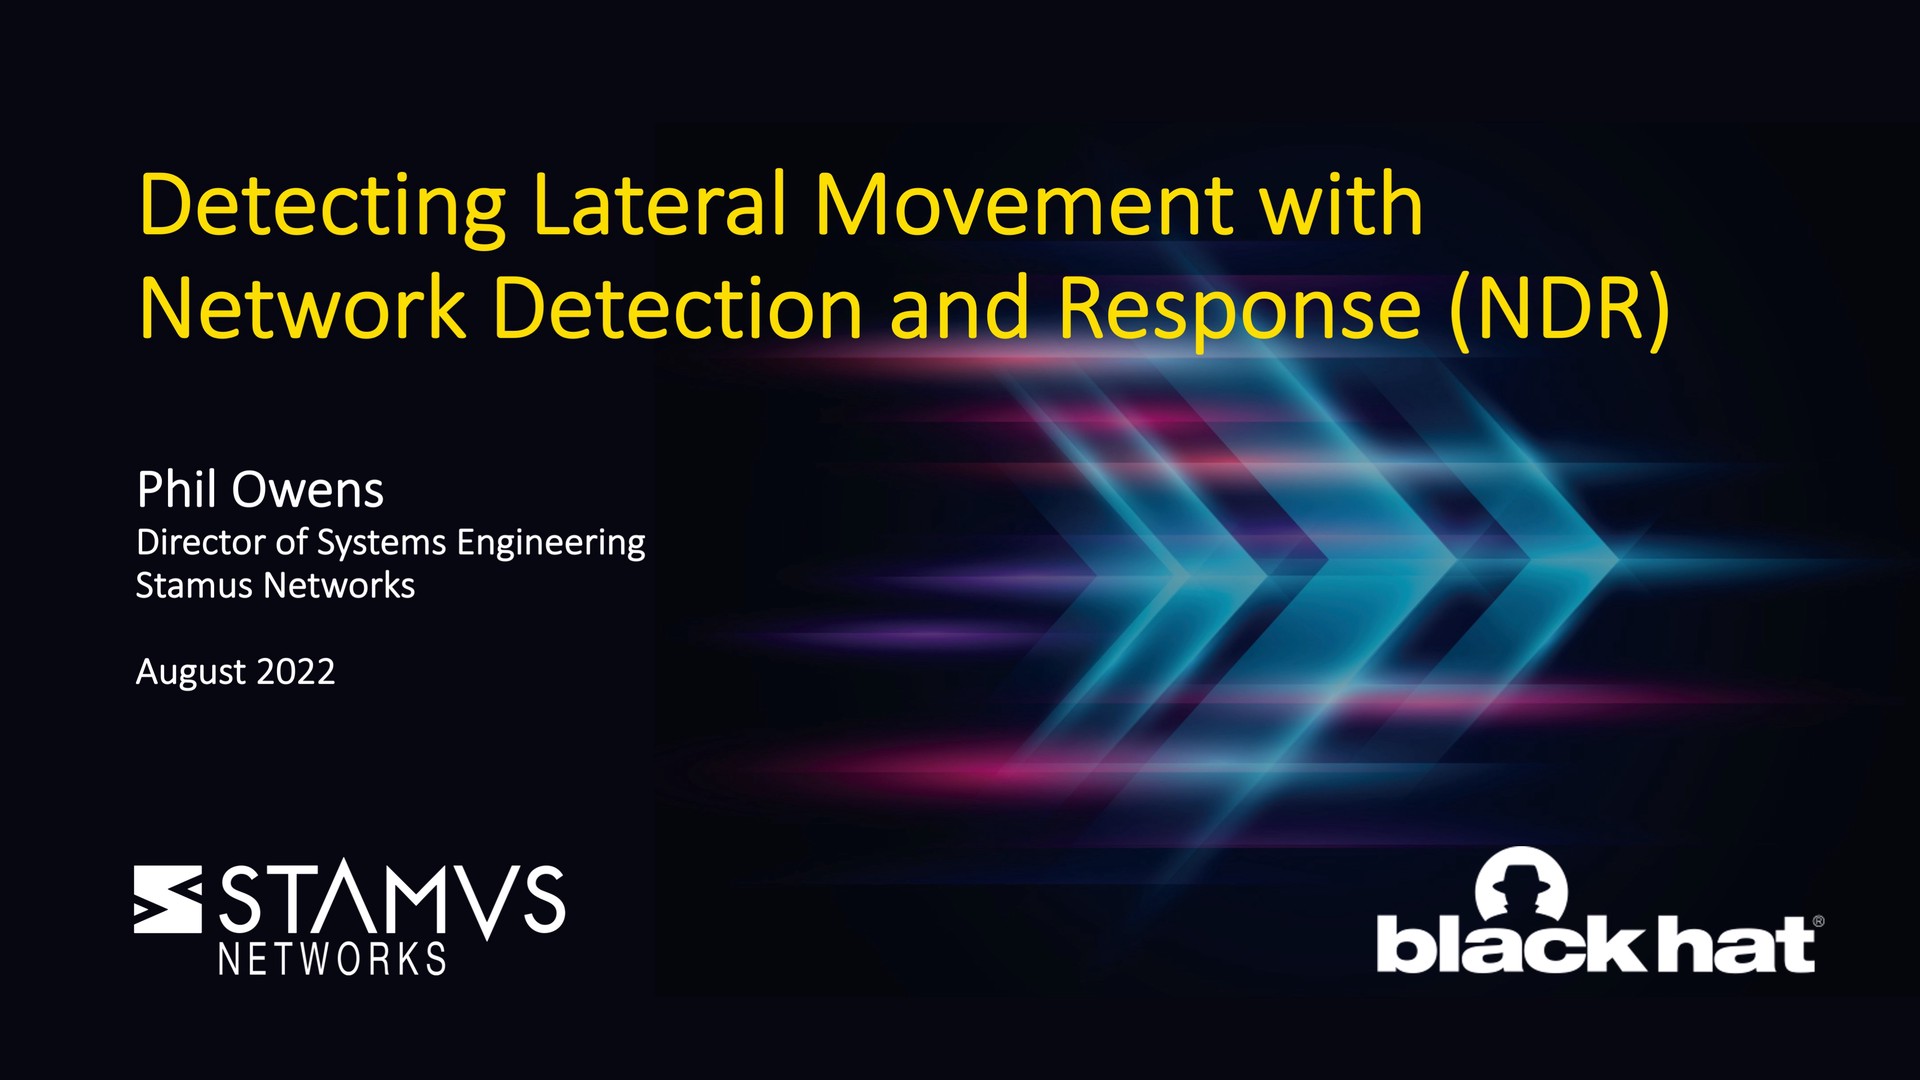 Detecting Lateral Movement with Network Detection and Response (NDR)